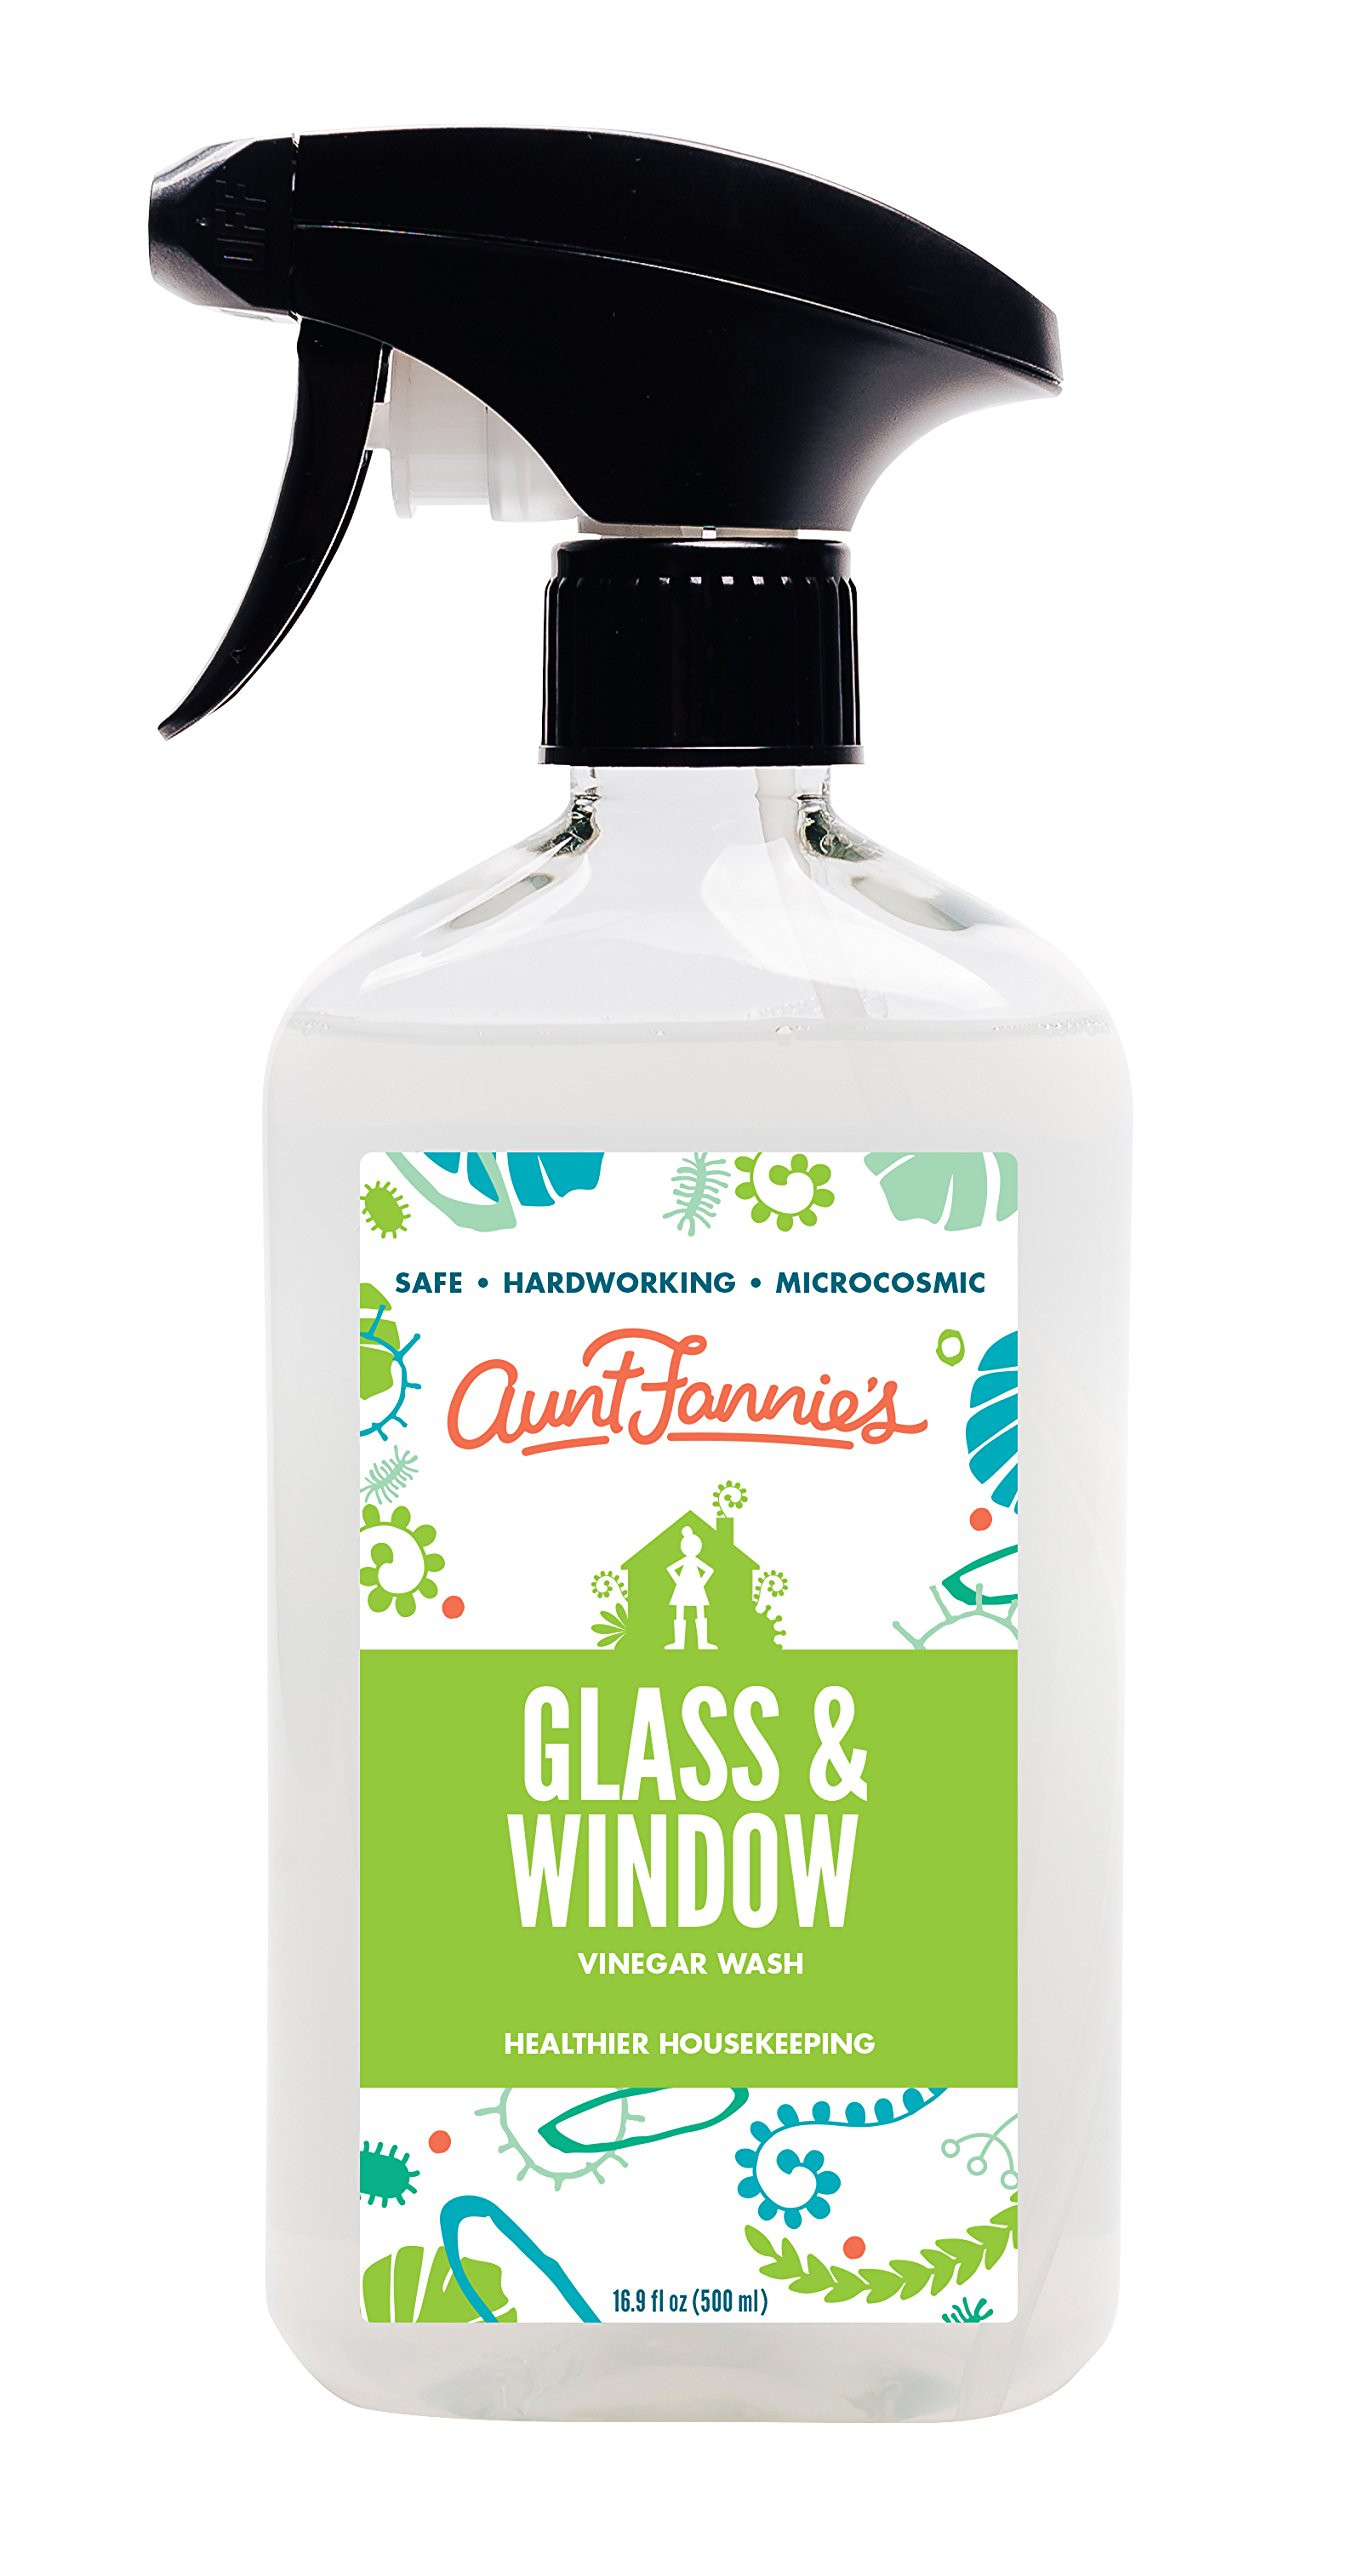 can you clean hardwood floors with vinegar and water of amazon com aunt fannies vinegar wash flr clnr mnt 32oz grocery throughout aunt fannies glass natural streak